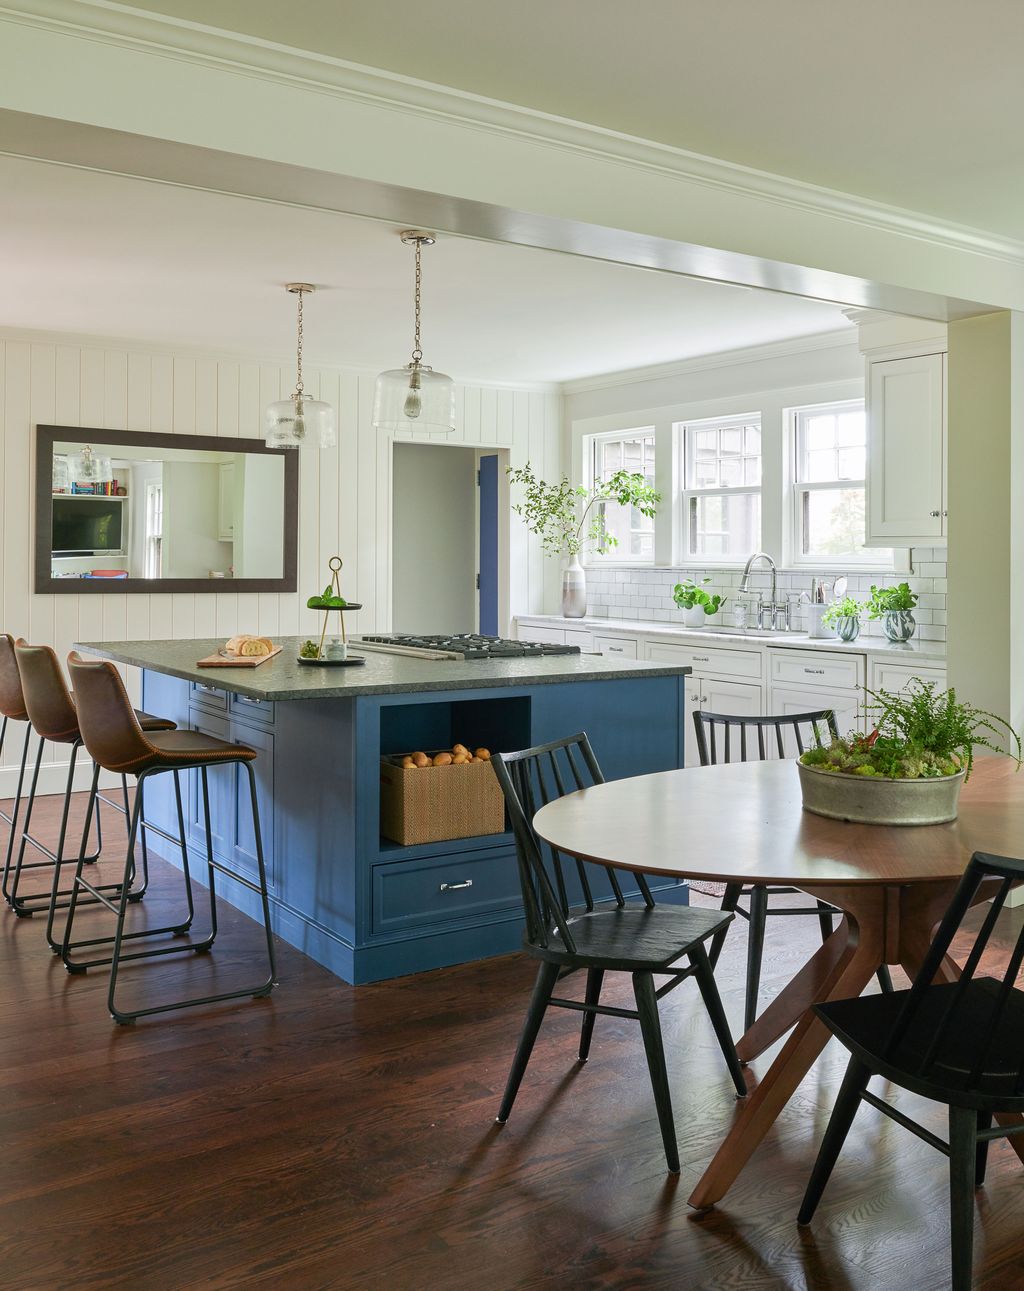 9 sustainable design tips from an old Connecticut home